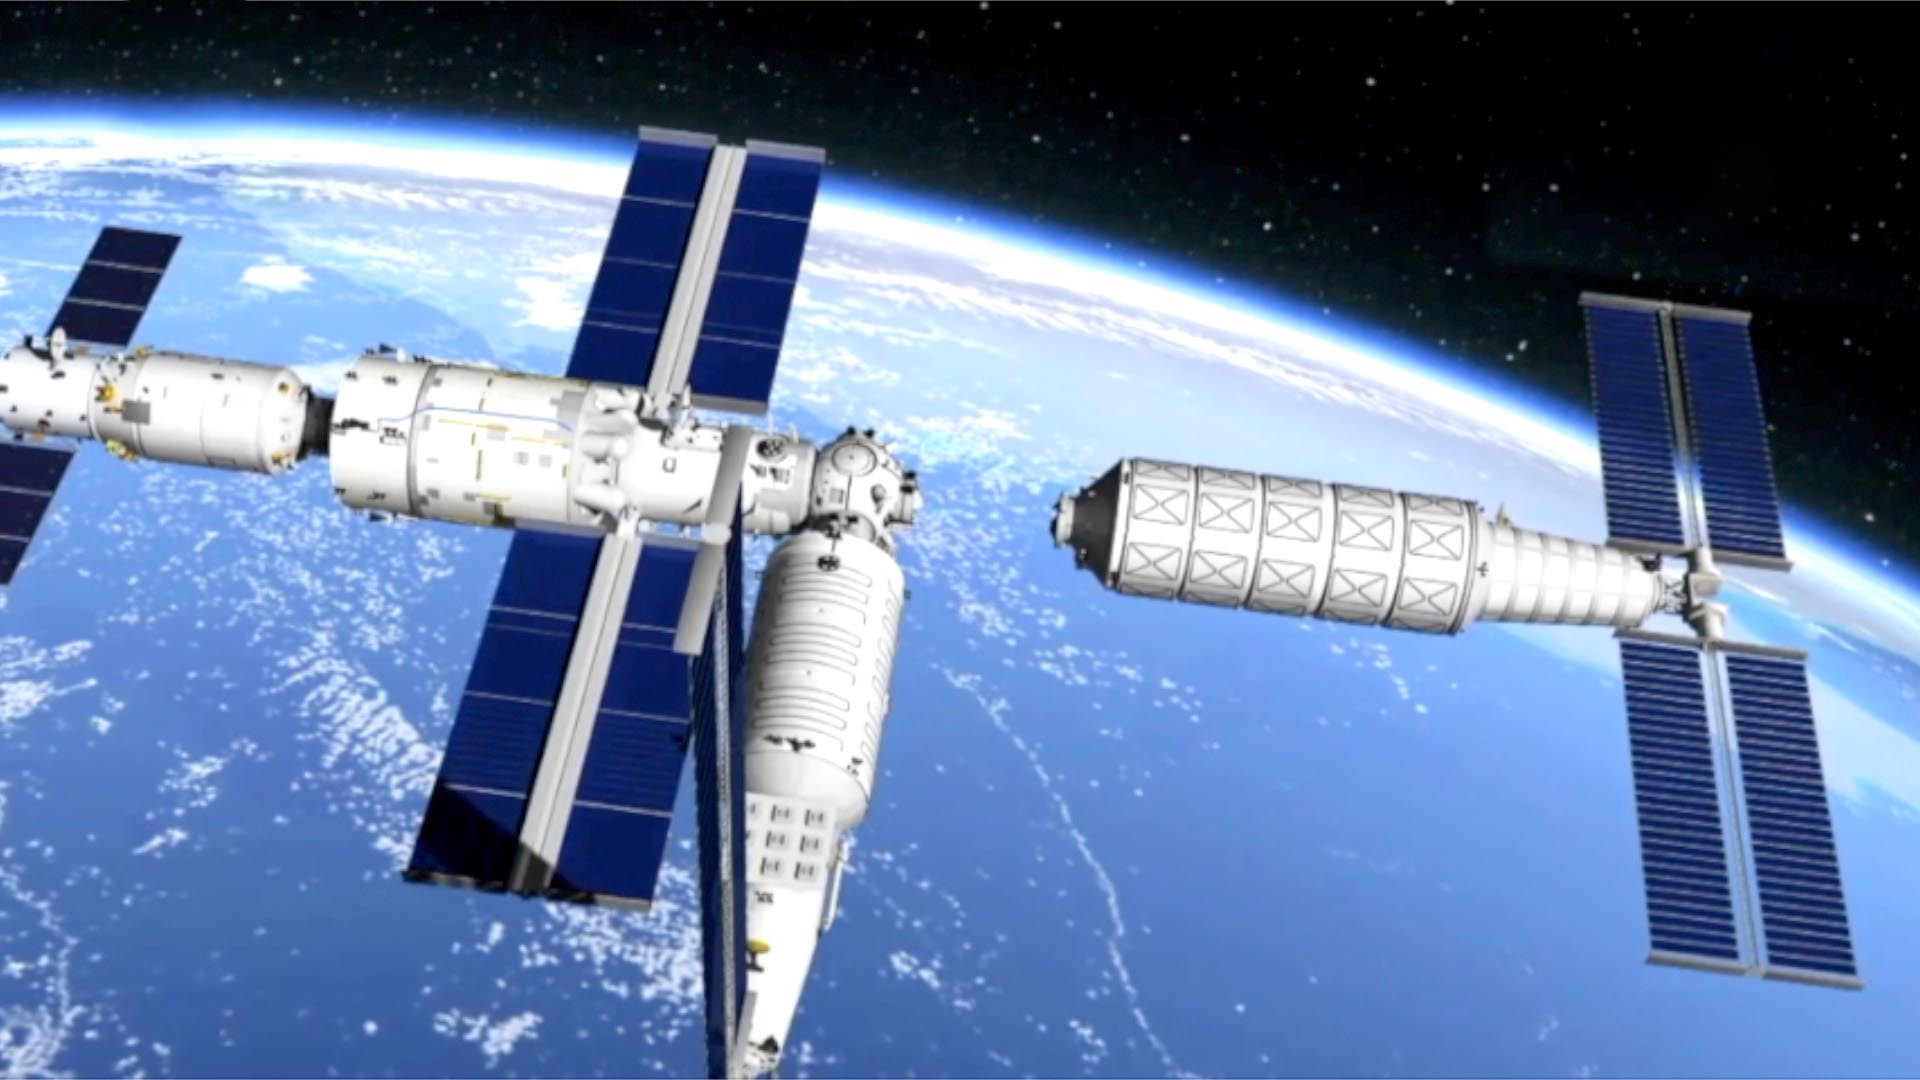 Tiangong-Space-Station-to-Provide-Commercial-Access